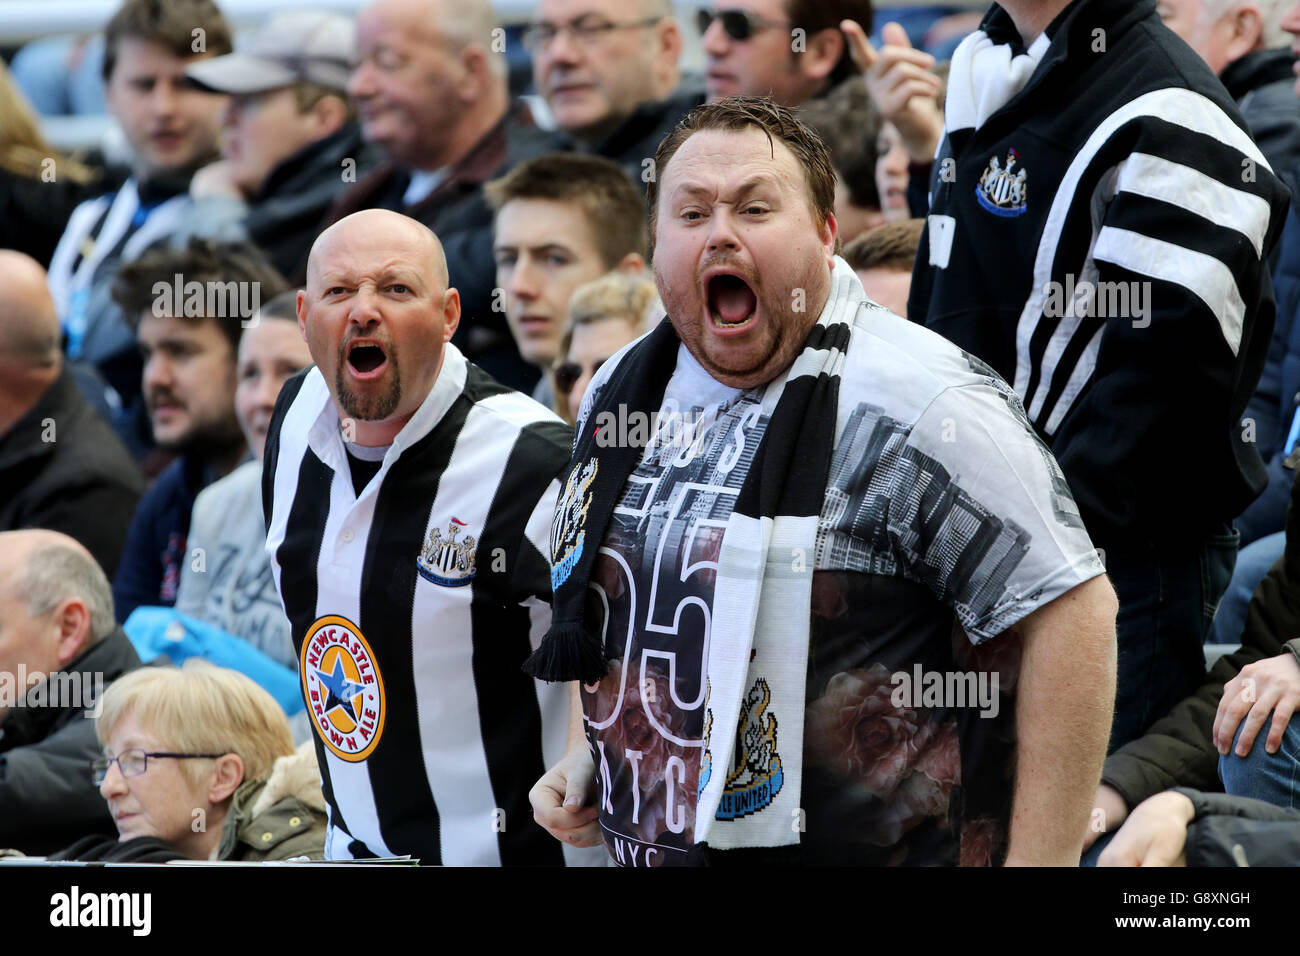 Newcastle United fans encourage their team during the Barclays Premier League match at St James' Park, Newcastle. Stock Photo